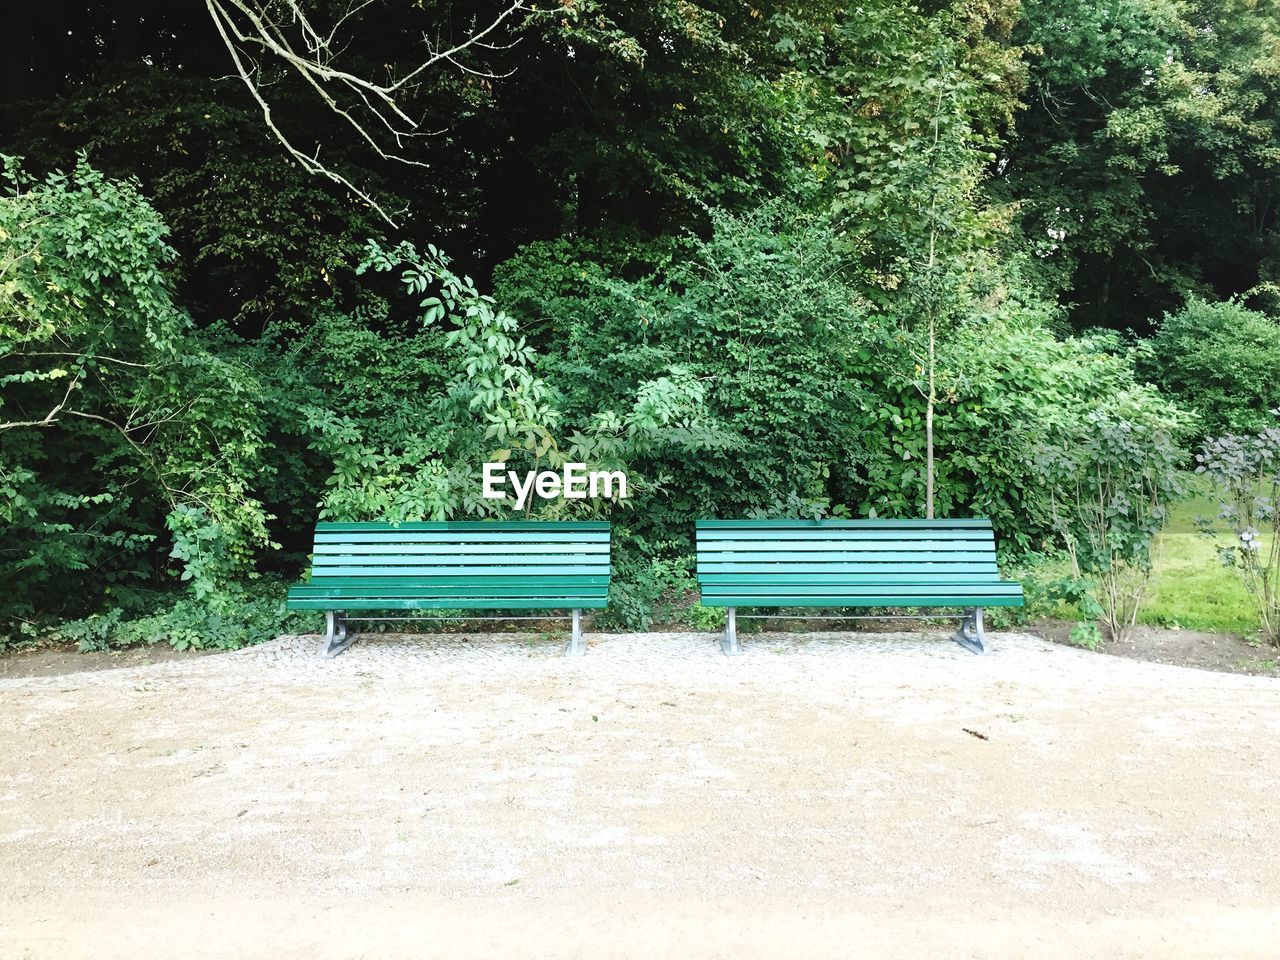 EMPTY BENCH IN PARK AGAINST TREES IN THE BACKGROUND